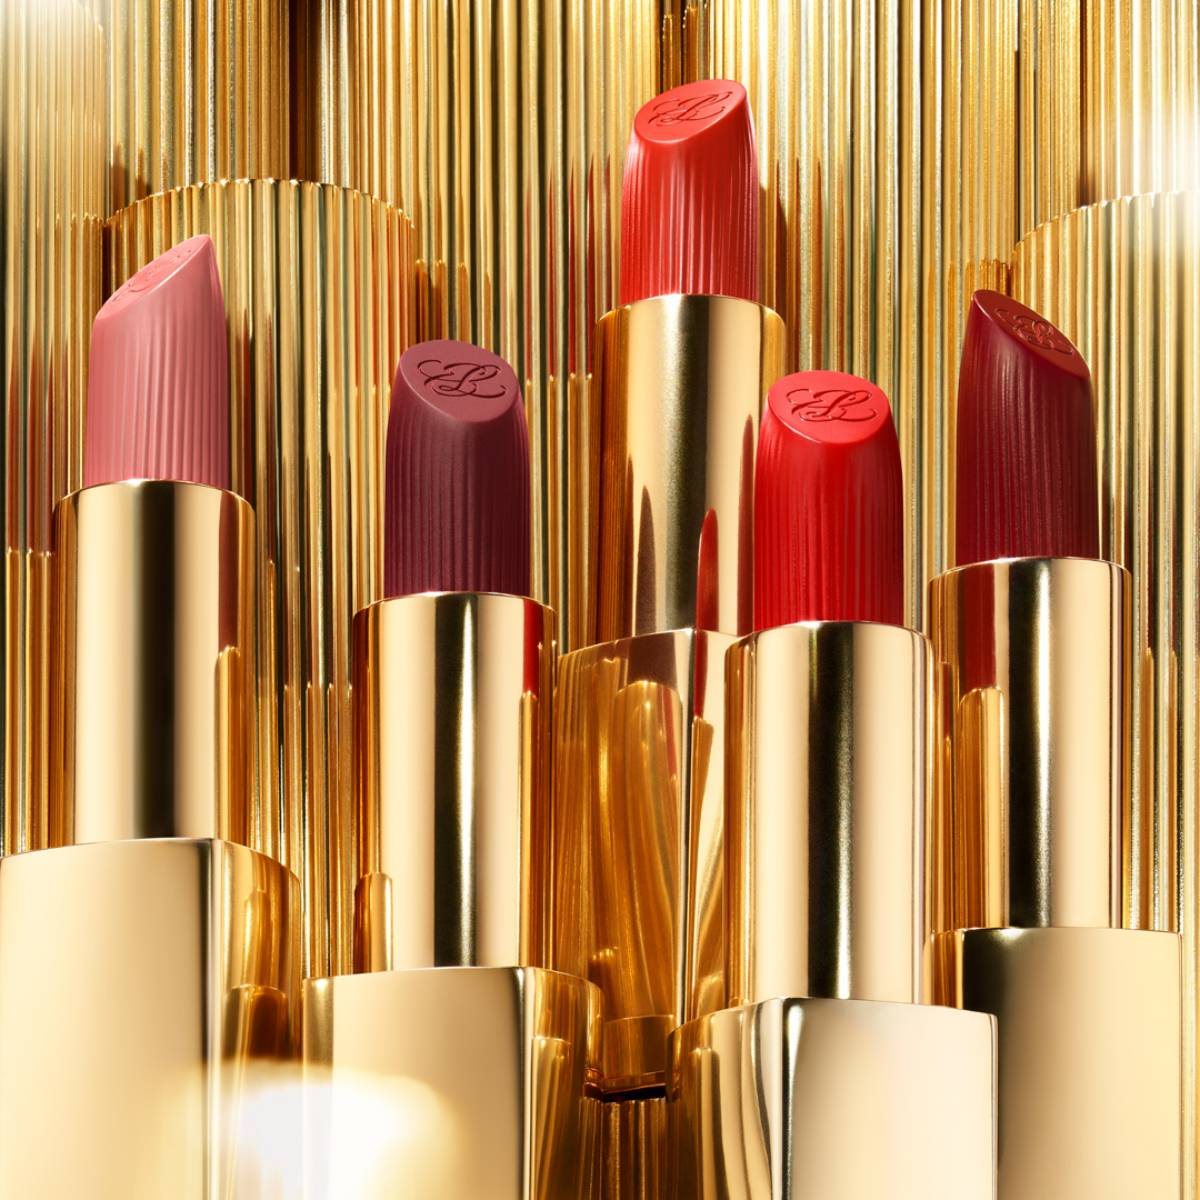 Lip Products We're Copping This National Lipstick Day